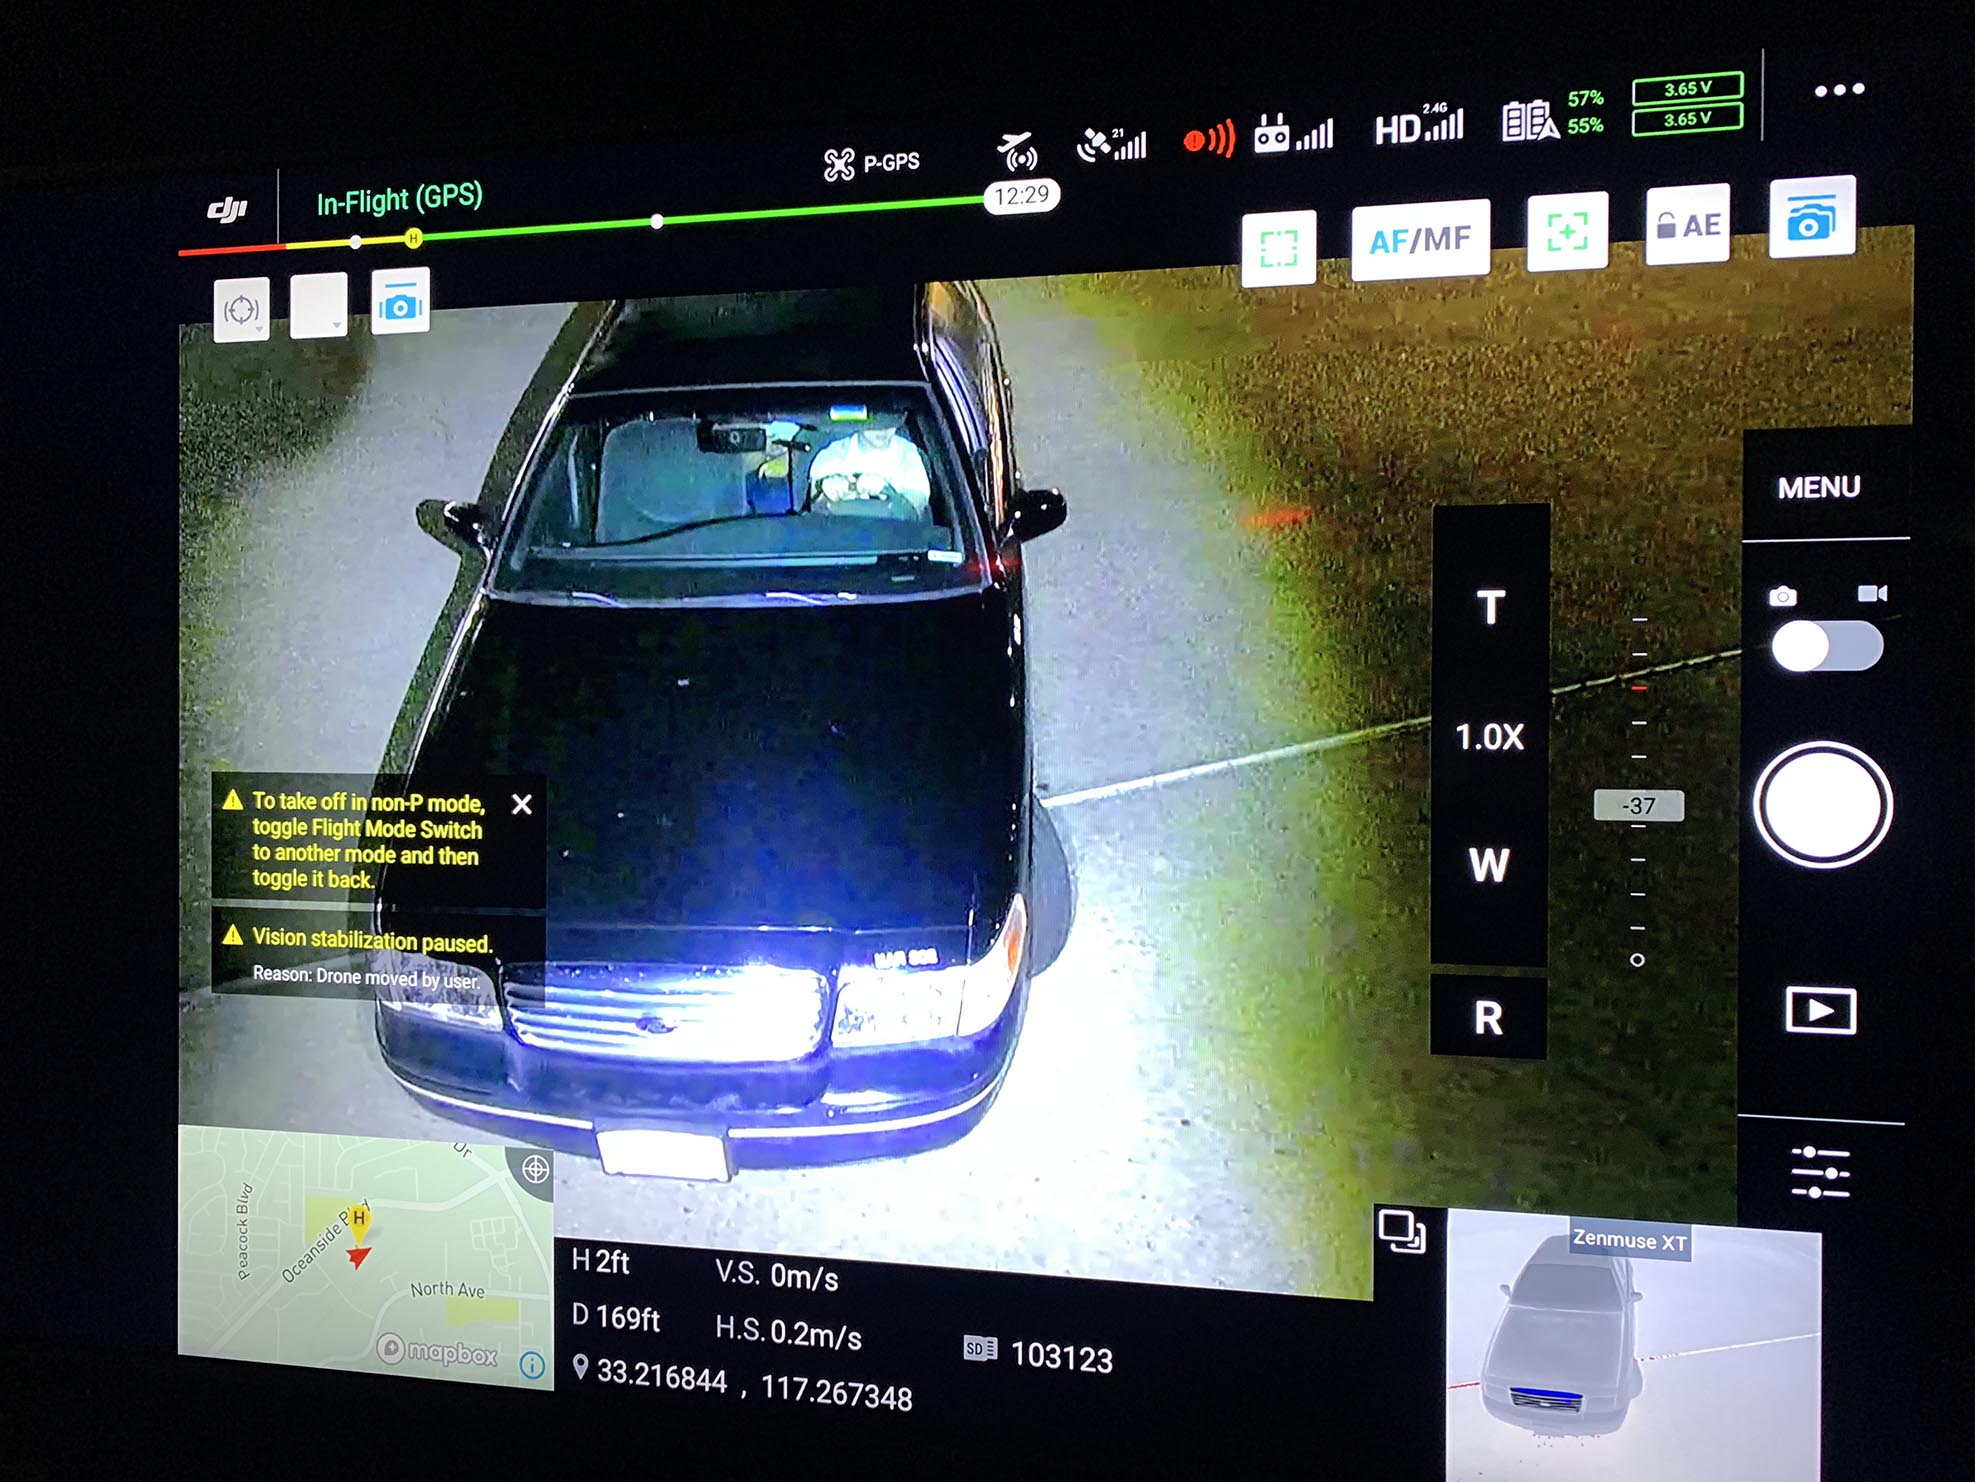 Rugo light is used to illuminate suspect and hostage in vehicle